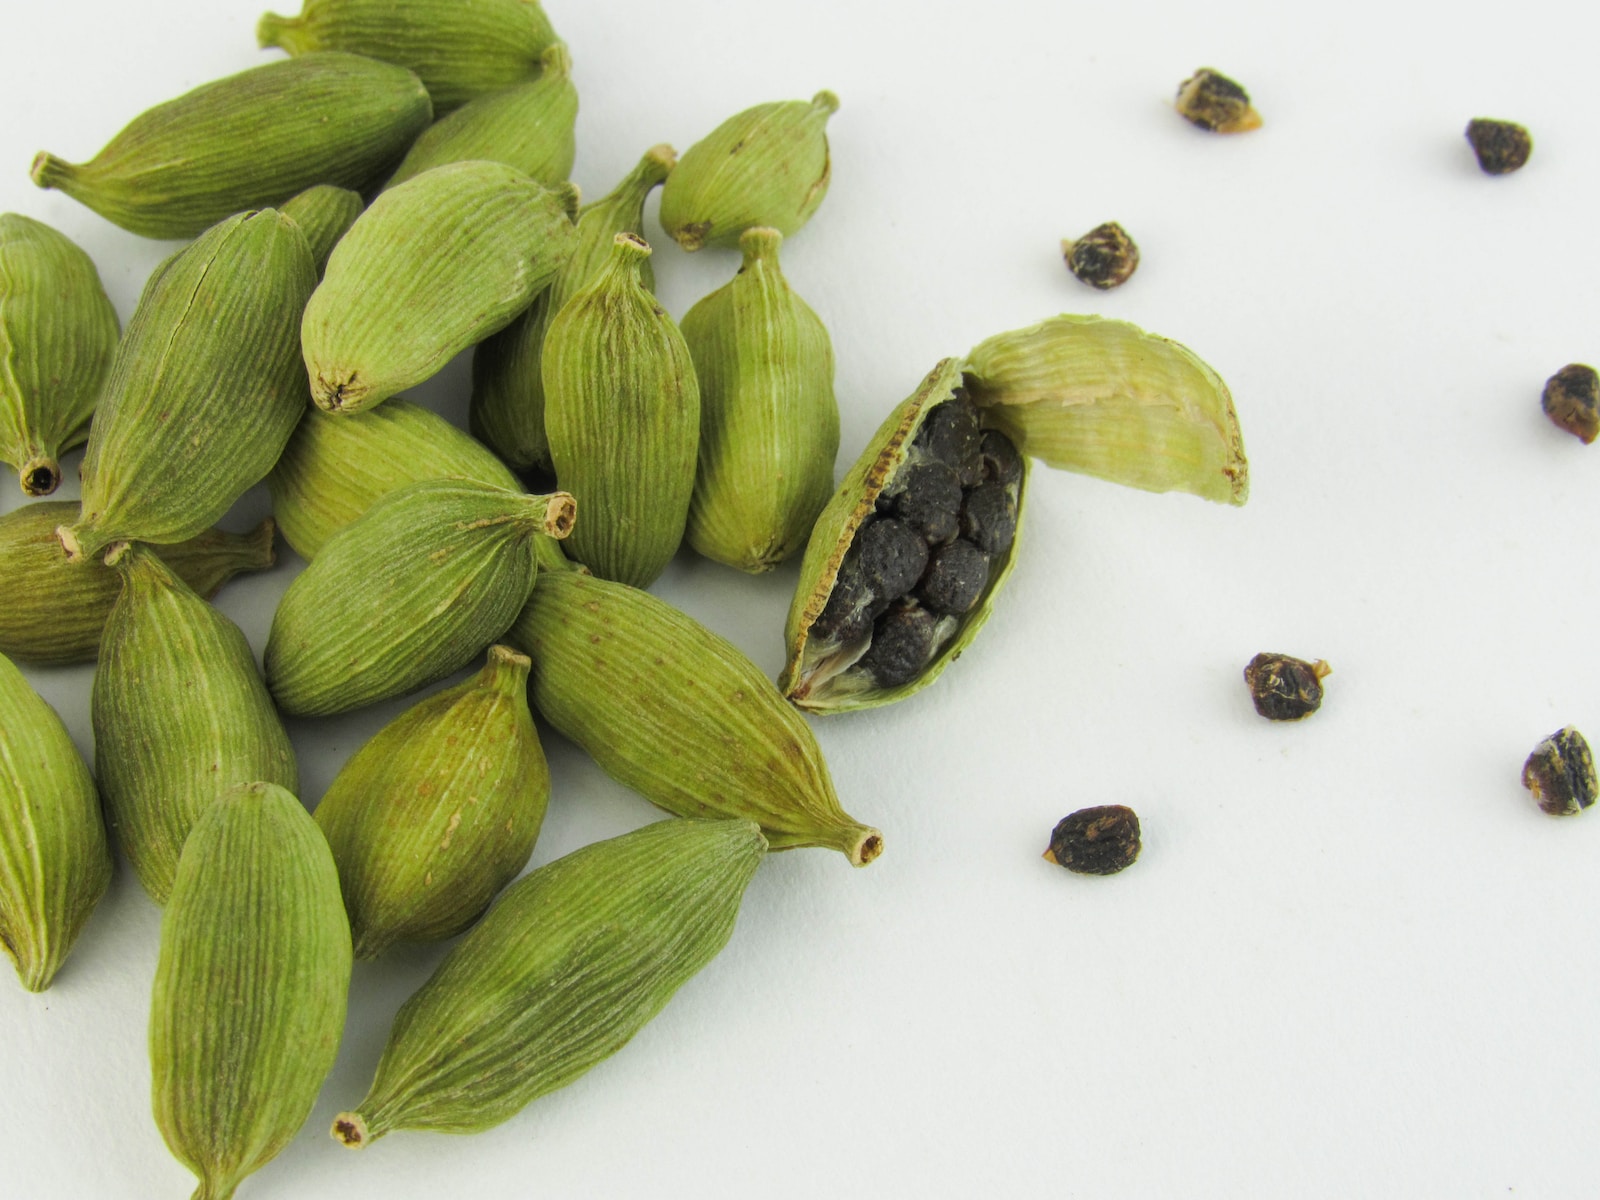 The miracles of the little cardamom.